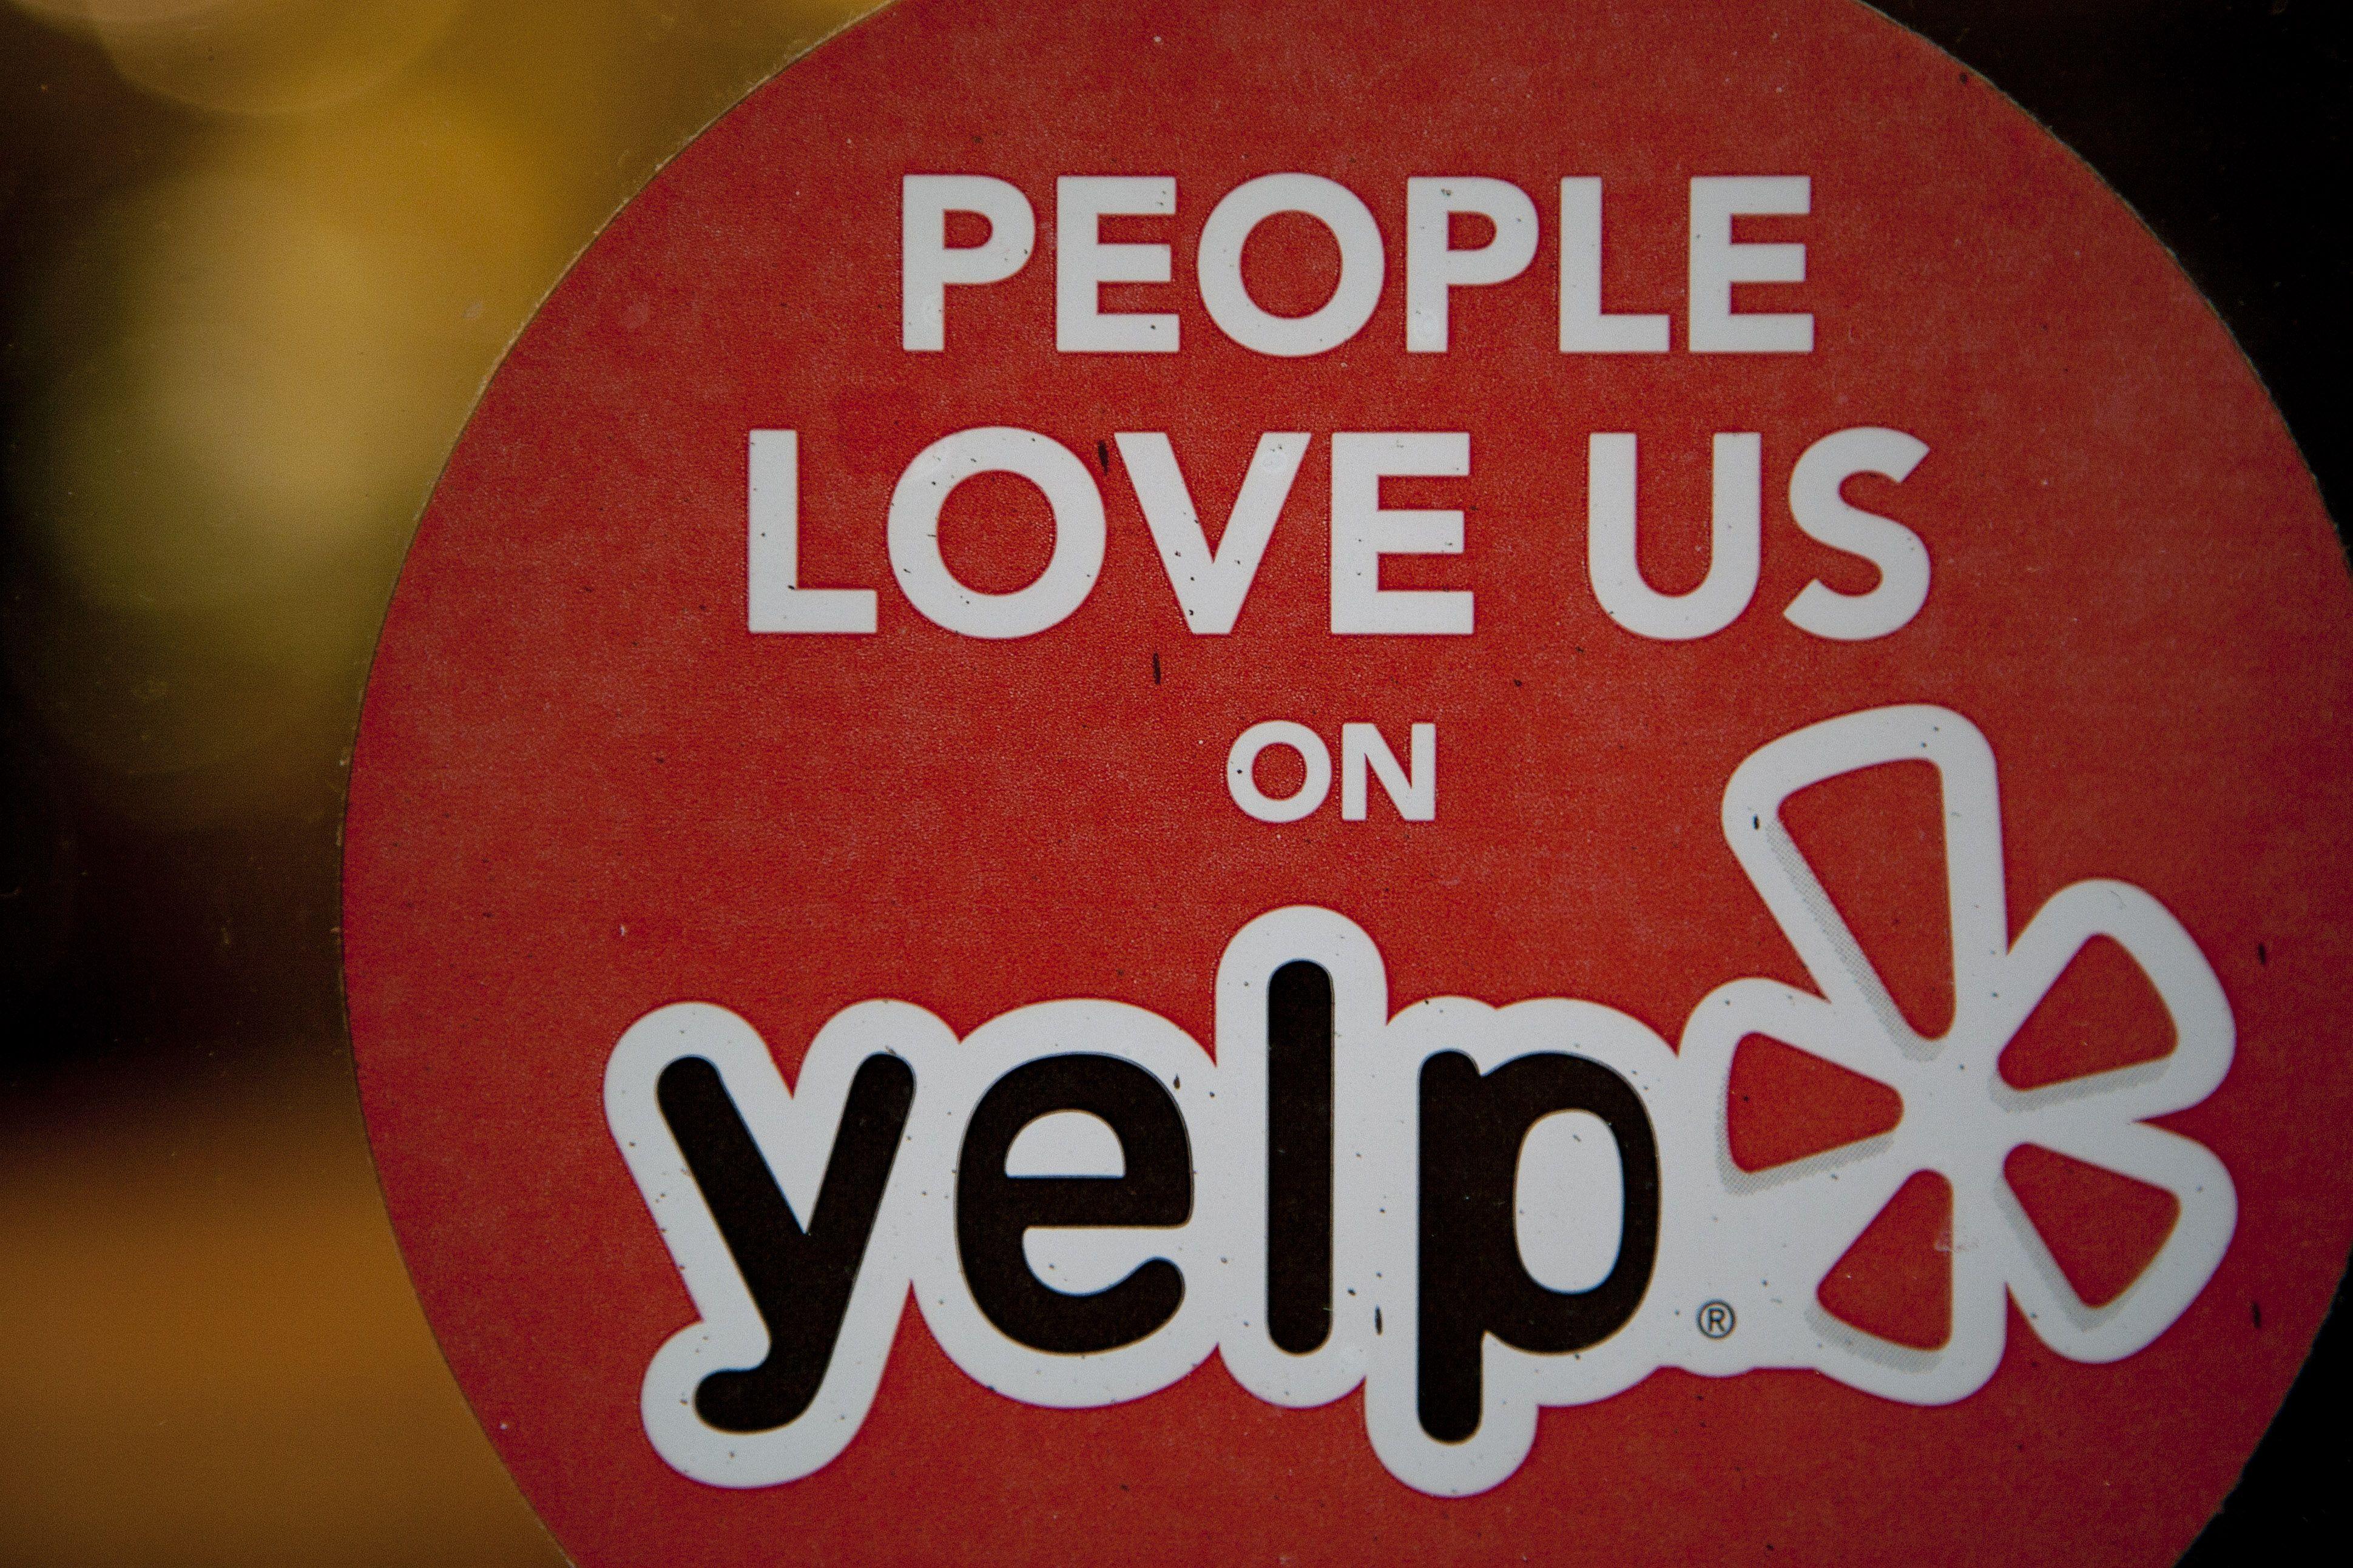 Review Us On Yelp Logo - Yelp Wants You to Review Federal Government Agencies | Time